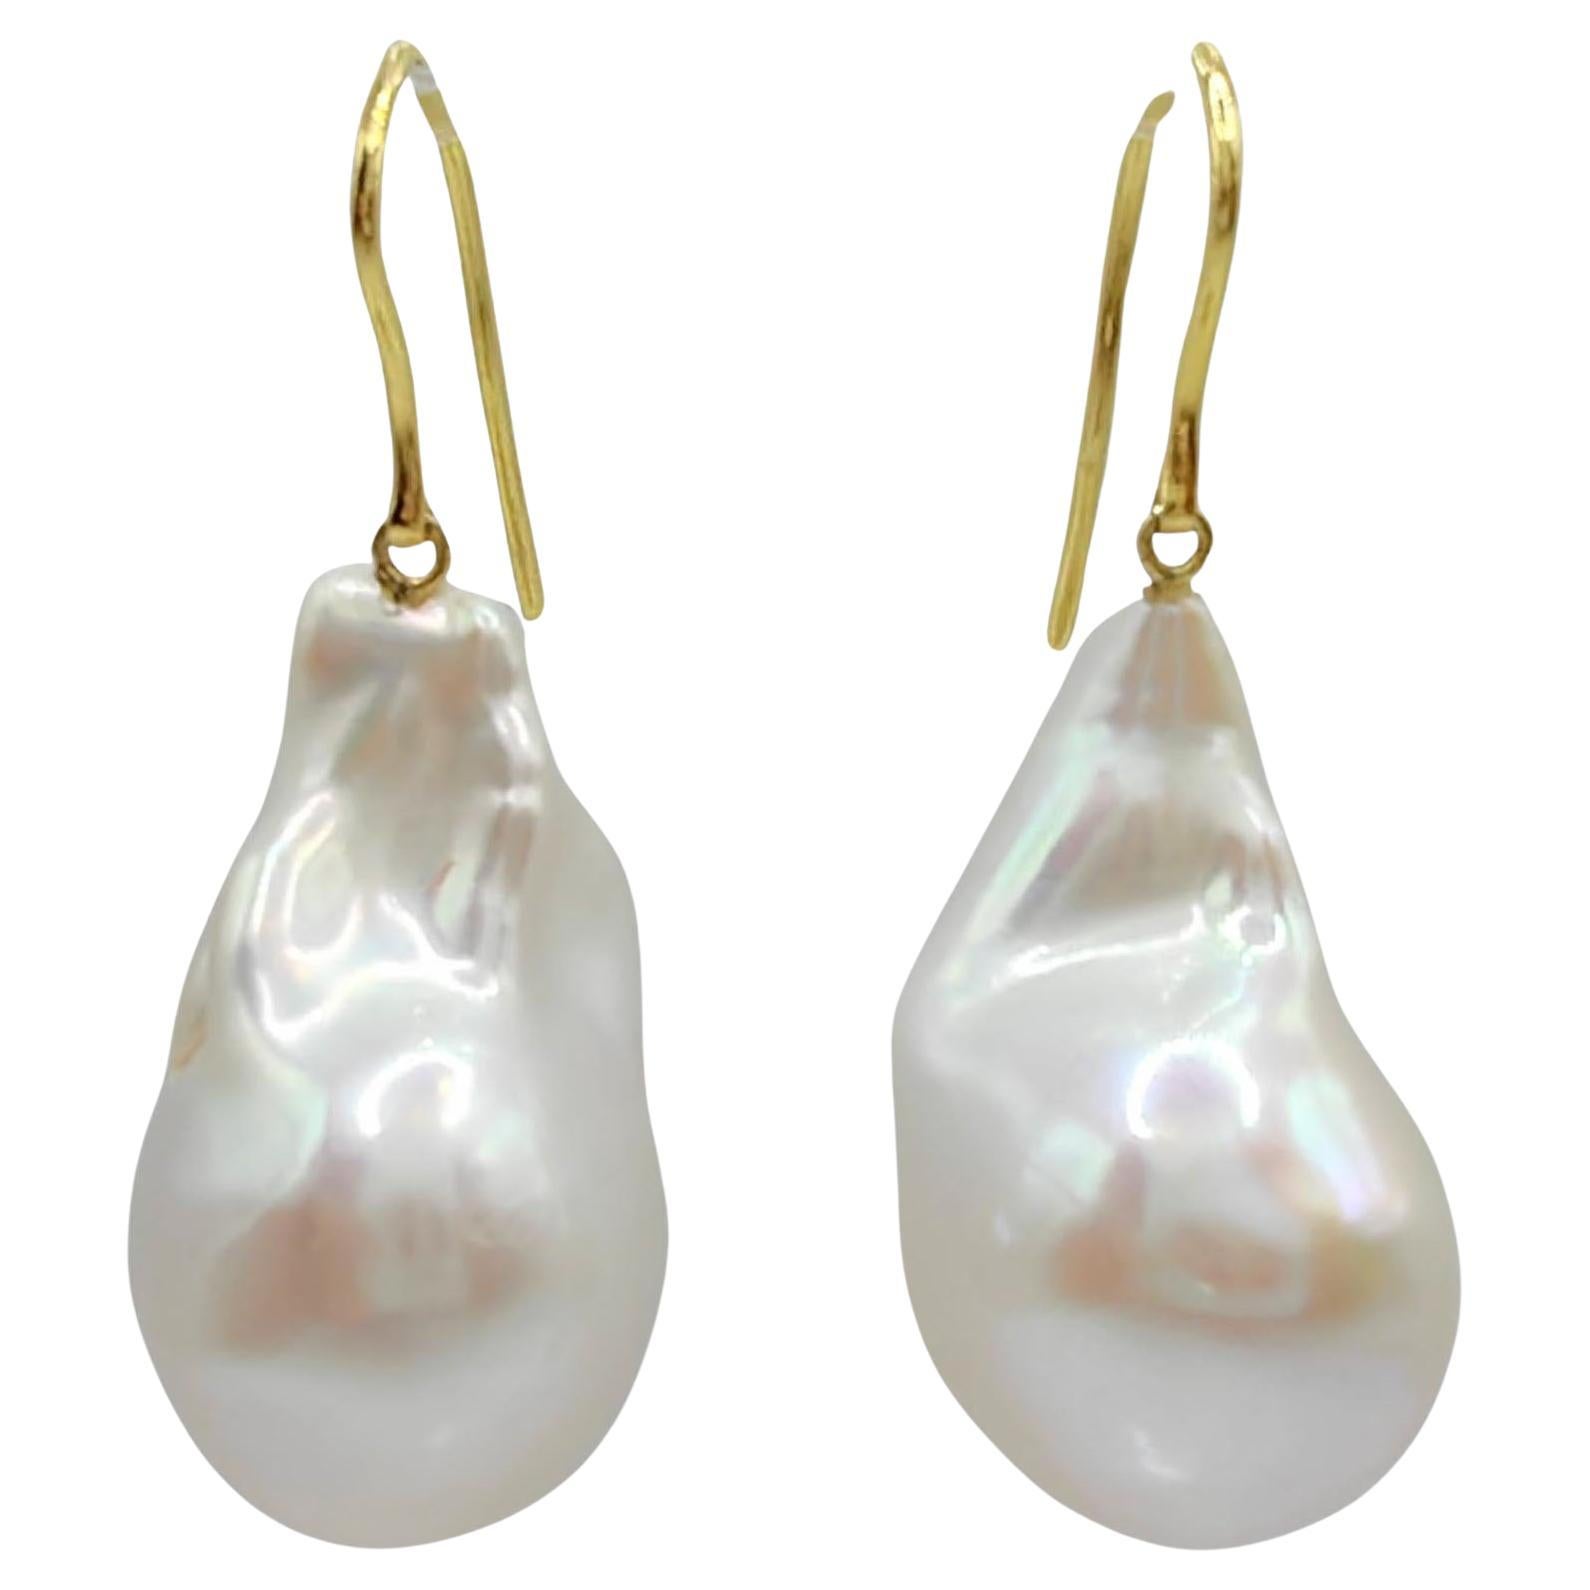 Iridescent Baroque Pearl Drop Earrings With 18K Yellow Gold French Hooks